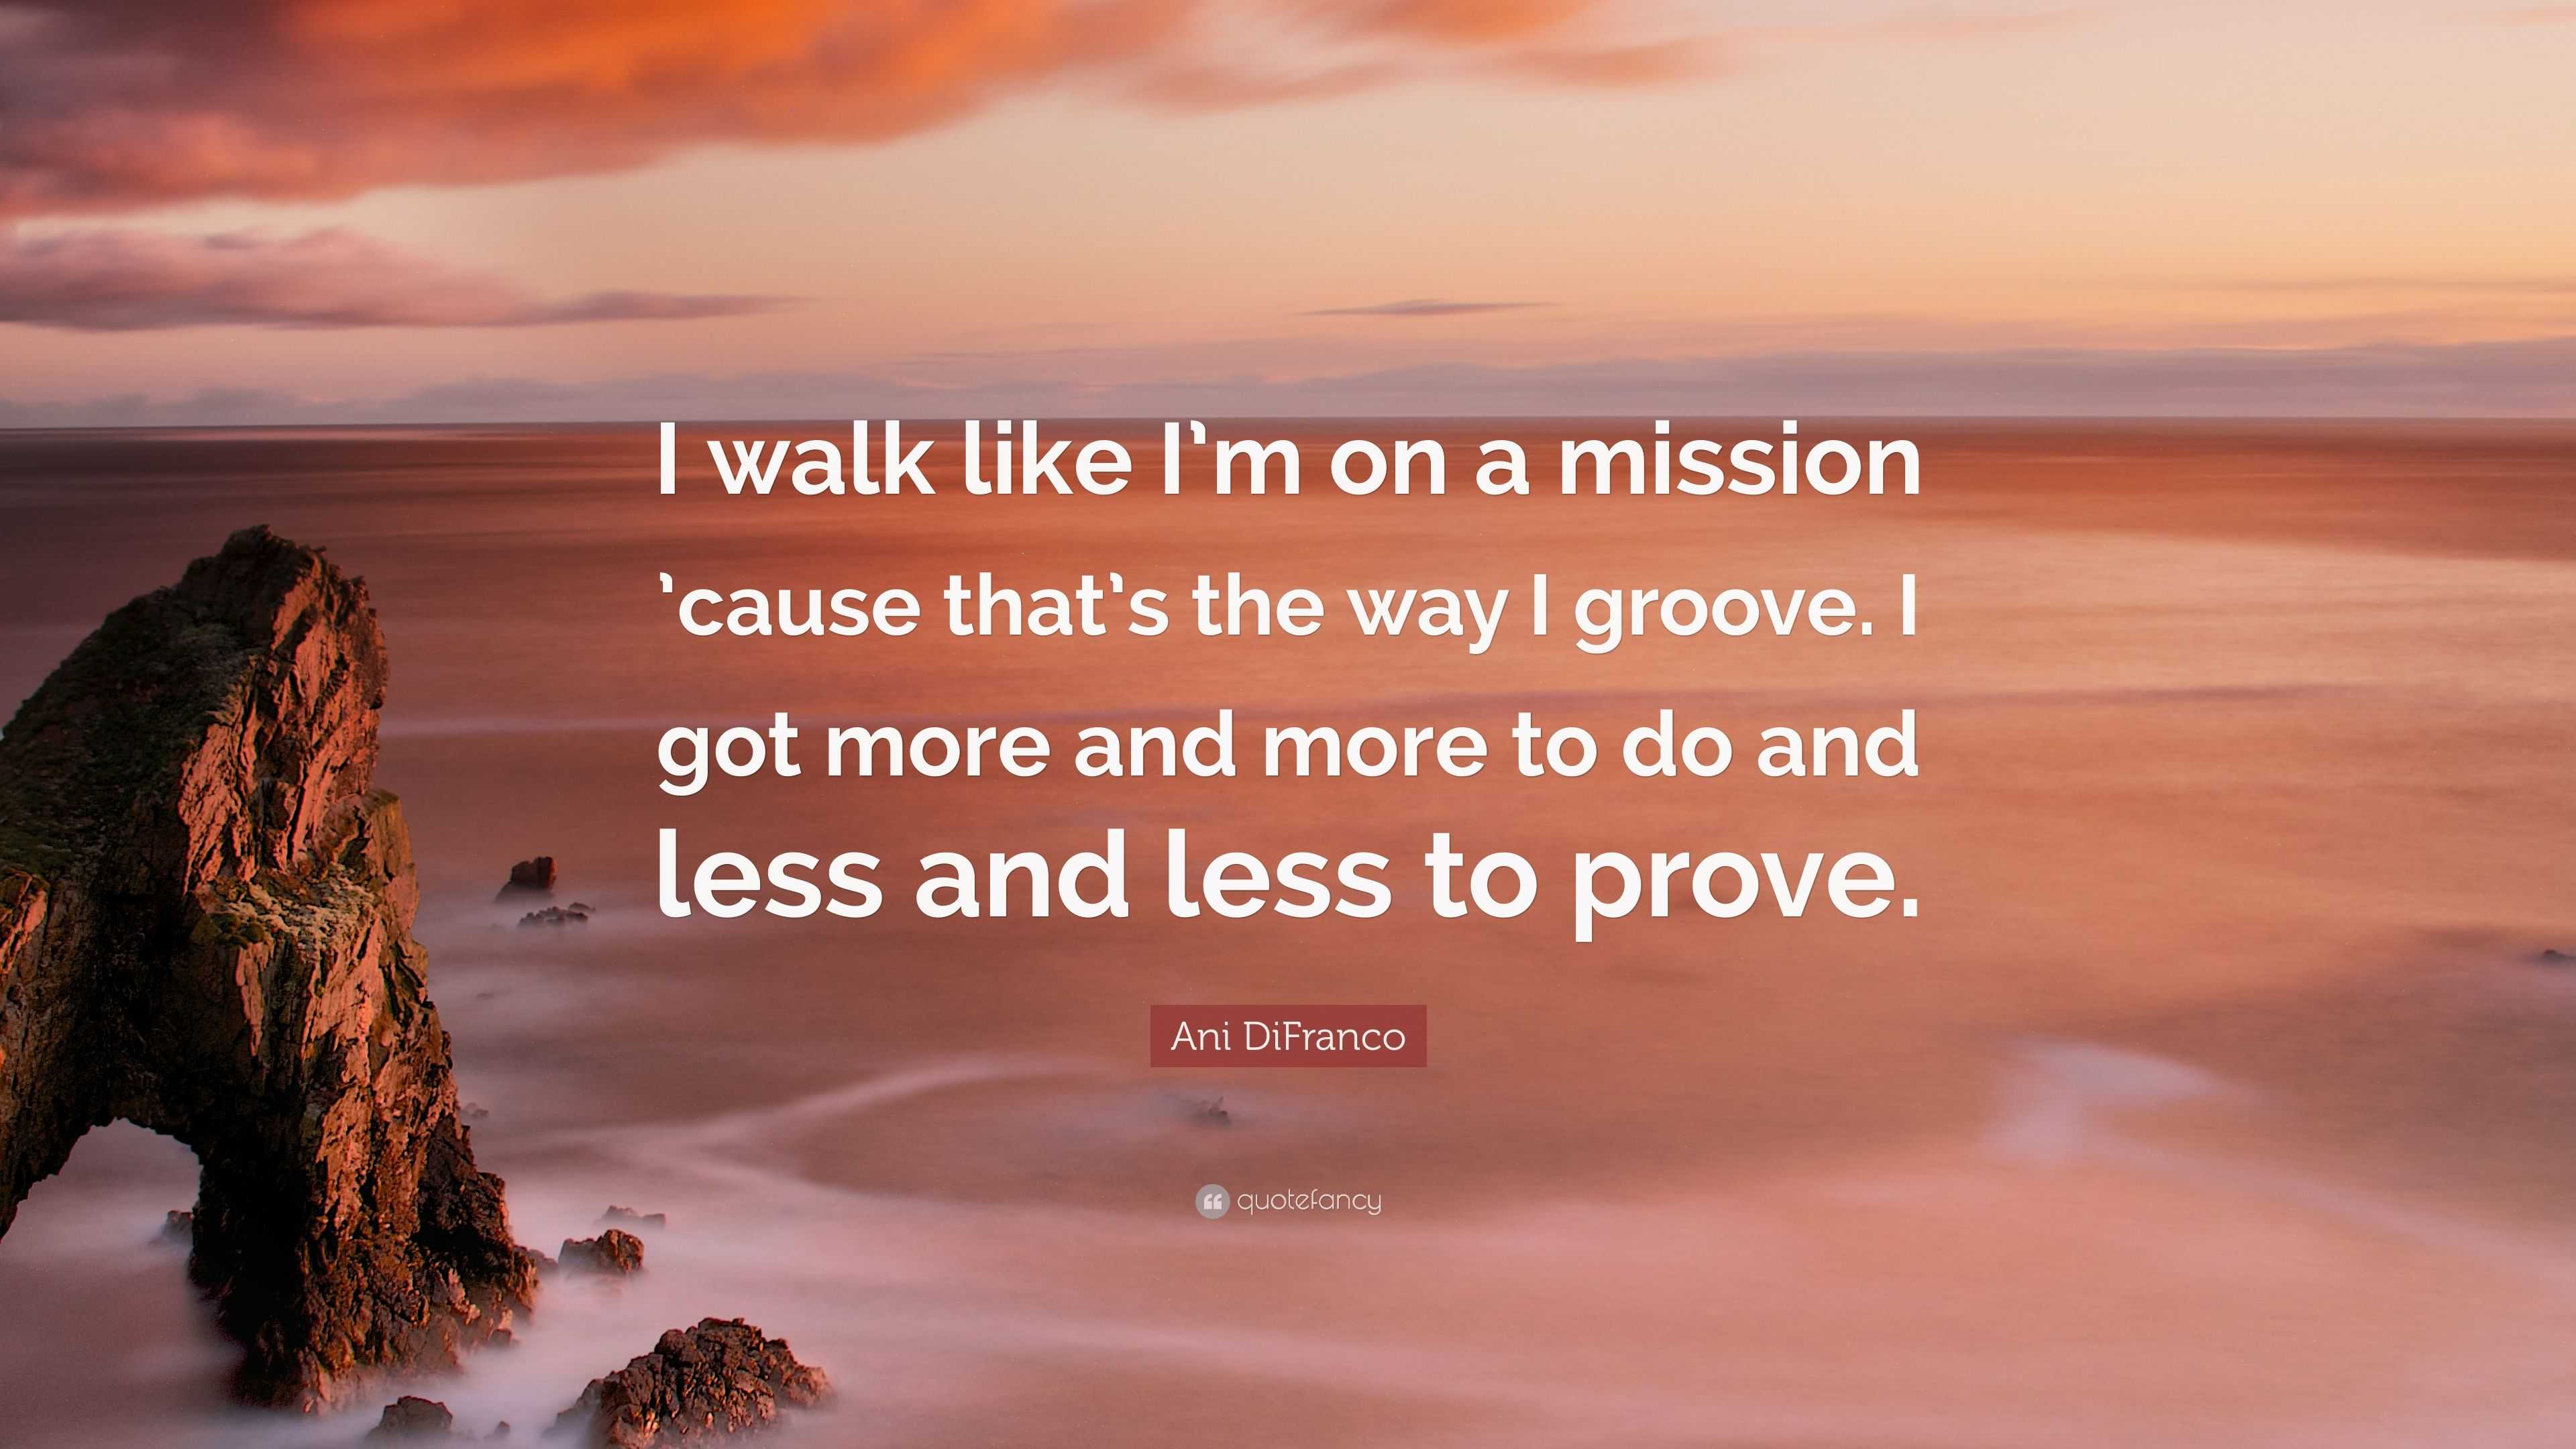 https://quotefancy.com/media/wallpaper/3840x2160/4812702-Ani-DiFranco-Quote-I-walk-like-I-m-on-a-mission-cause-that-s-the.jpg